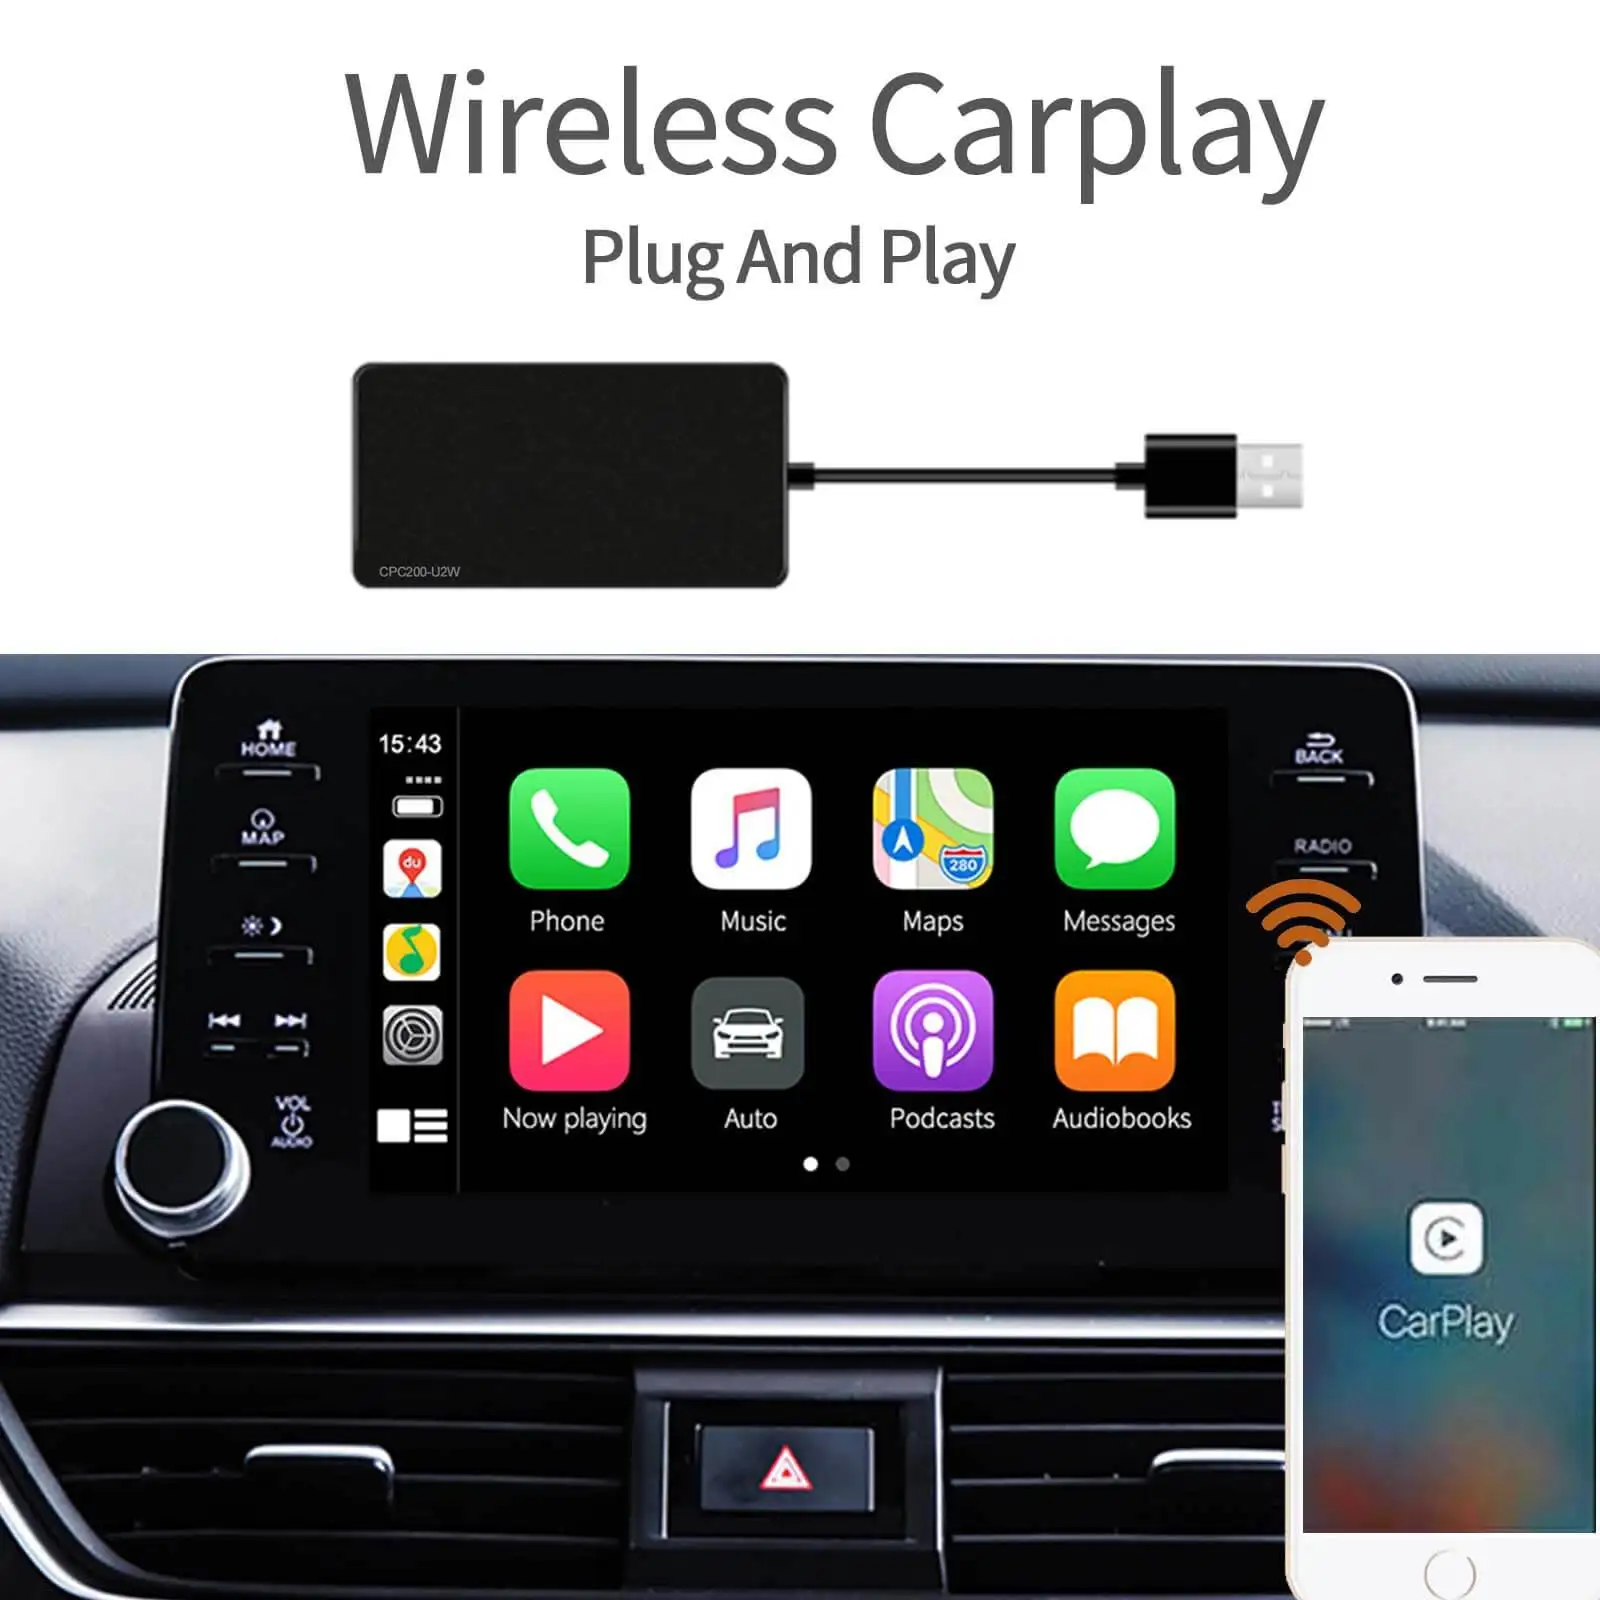 

Ezonetronics Portable USB Dongle Wired to Wireless CarPlay Adapter for Audi Porsche Volvo Benz Volkswagen KIA Hyundai for IPhone